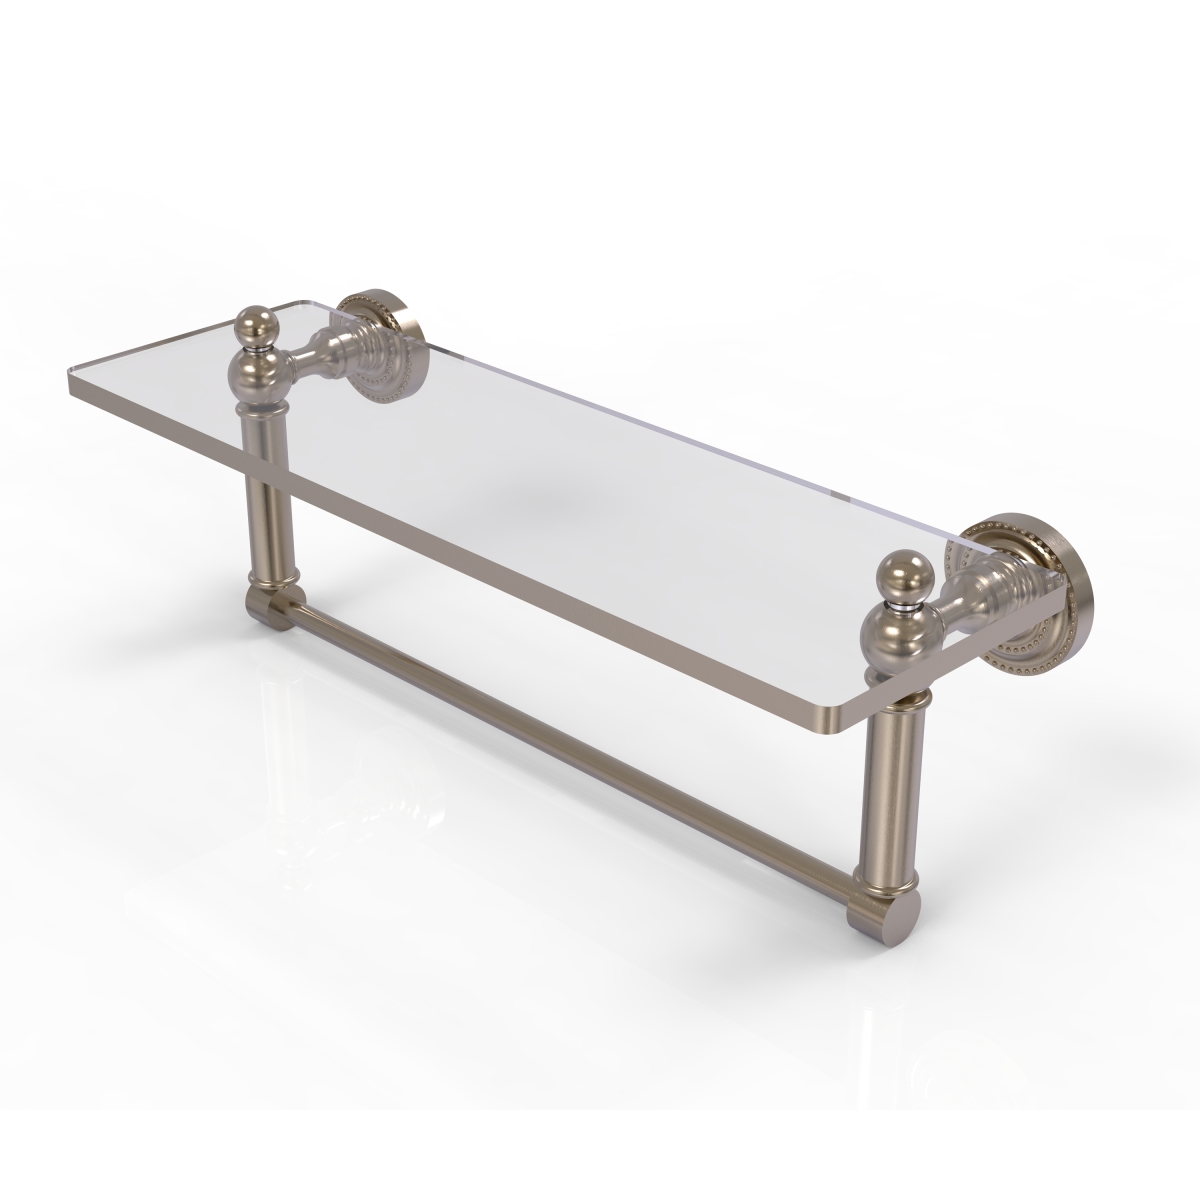 Picture of Allied Brass DT-1TB-16-PEW 16 in. Dottingham Glass Vanity Shelf with Integrated Towel Bar, Antique Pewter